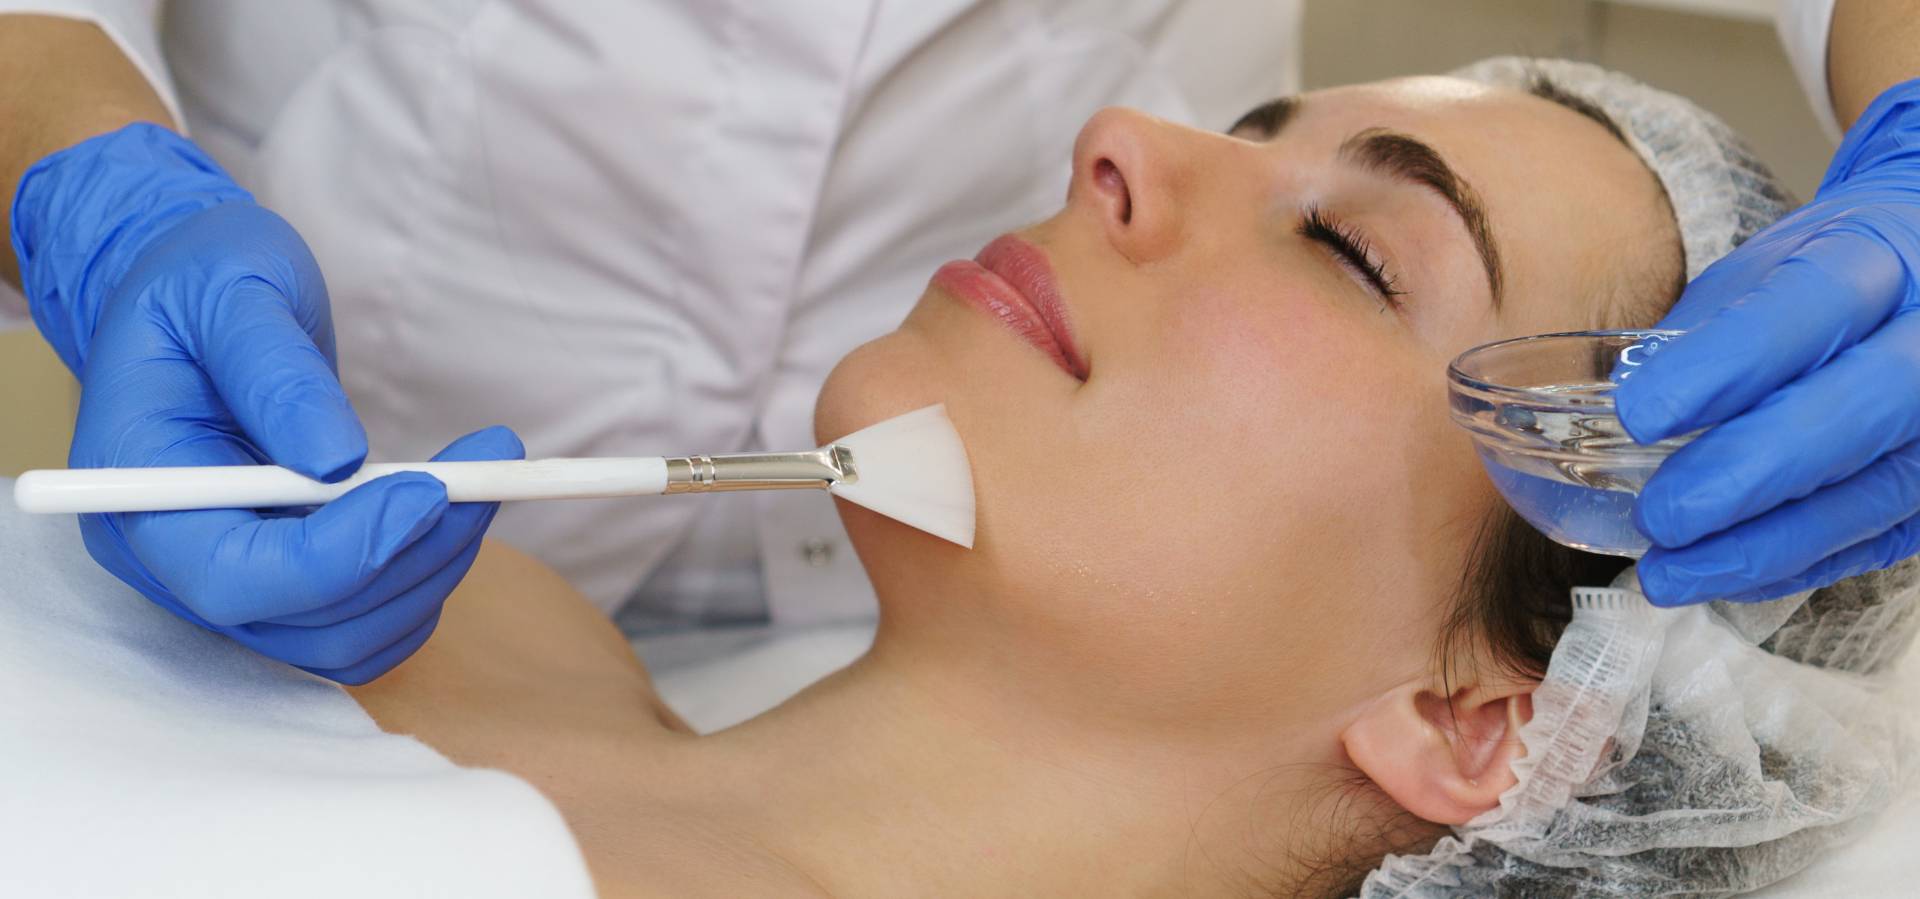 An image of a woman with her eyes closed, receiving a facial treatment.